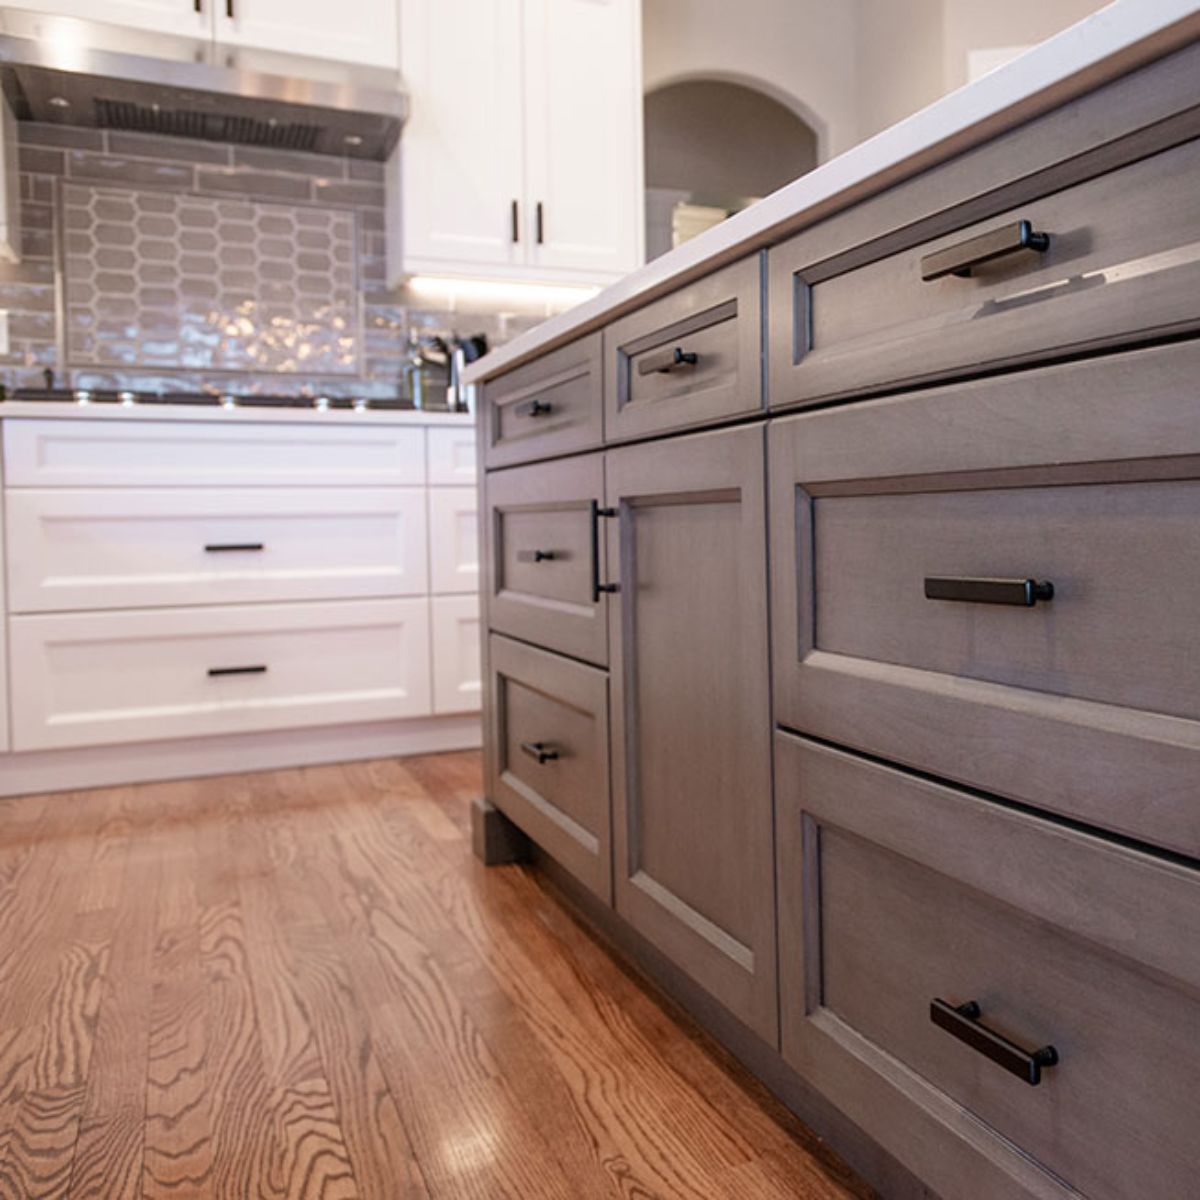 7 Reasons Caruso Kitchen Designs Should Be Your Go-To Choice for Luxury Kitchen Renovations